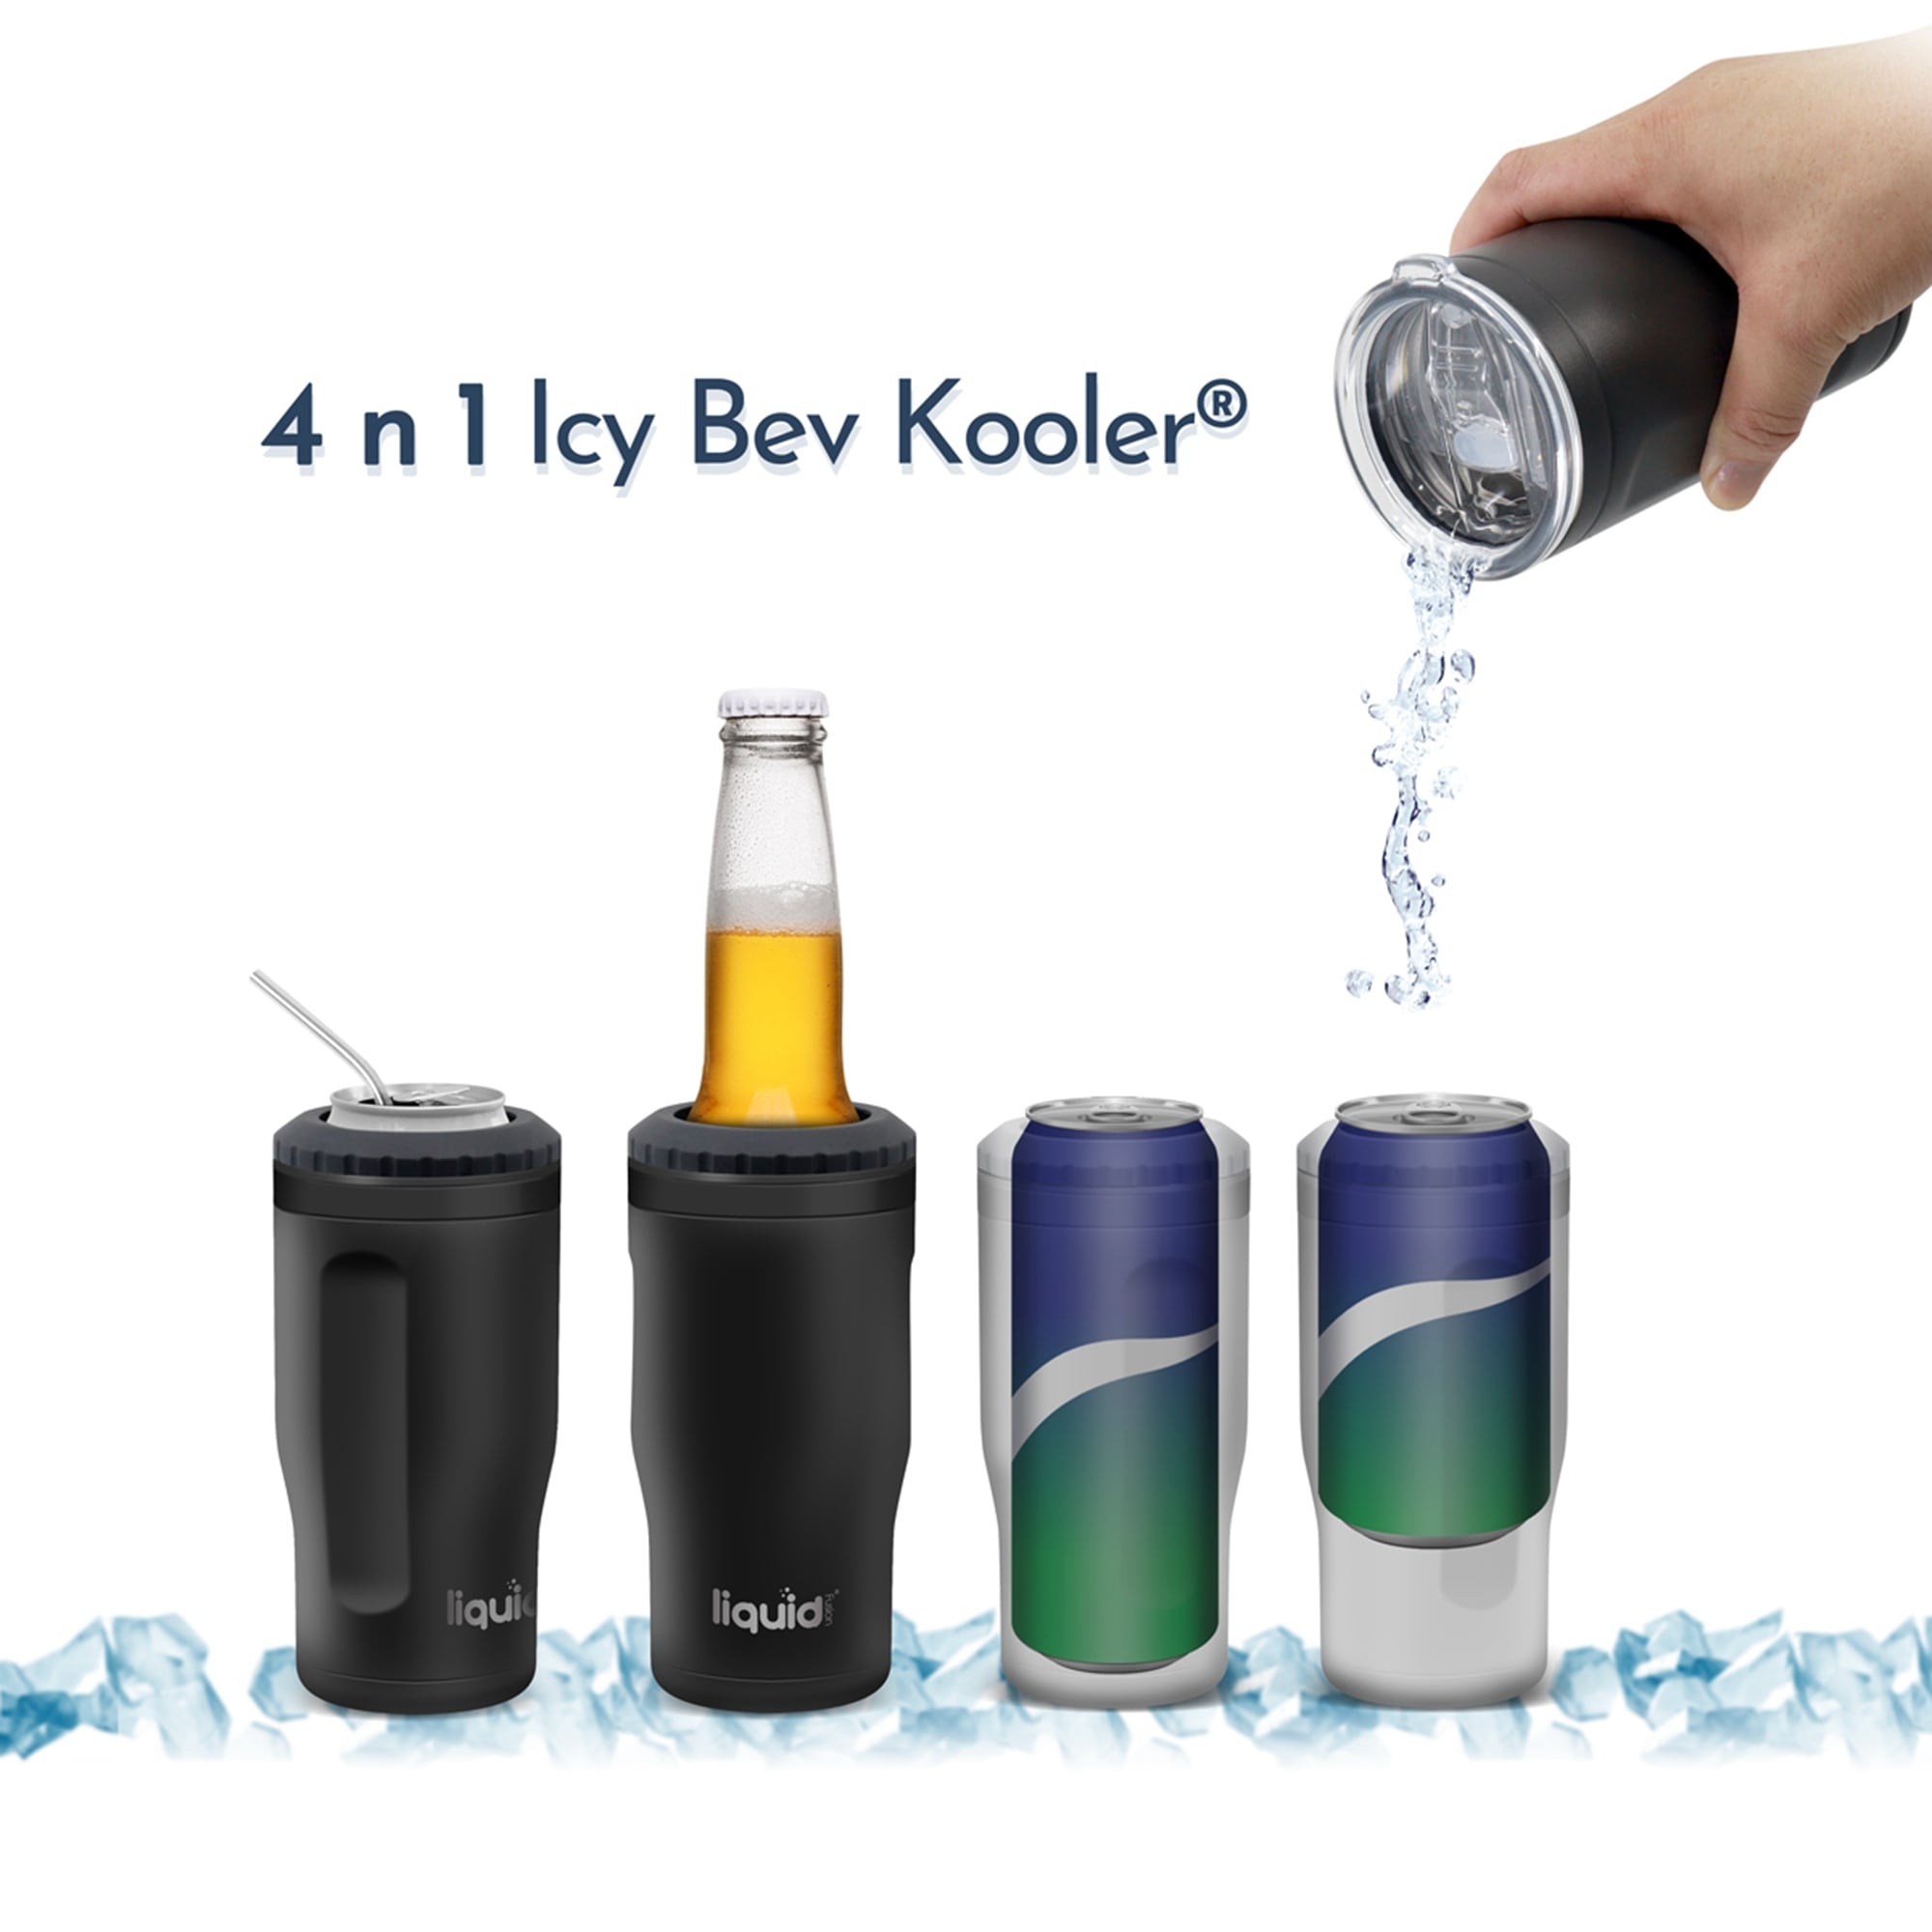 https://ak1.ostkcdn.com/images/products/is/images/direct/ff88328aa6fb3bbd281f2d047ec9dd5897dbd696/Grand-Fusion-4-n-1-Icy-Bev-Kooler%2C-Stainless-Tumbler%2C-Bottle-Insulator%2C-Can-Insulator%2C-Black.jpg